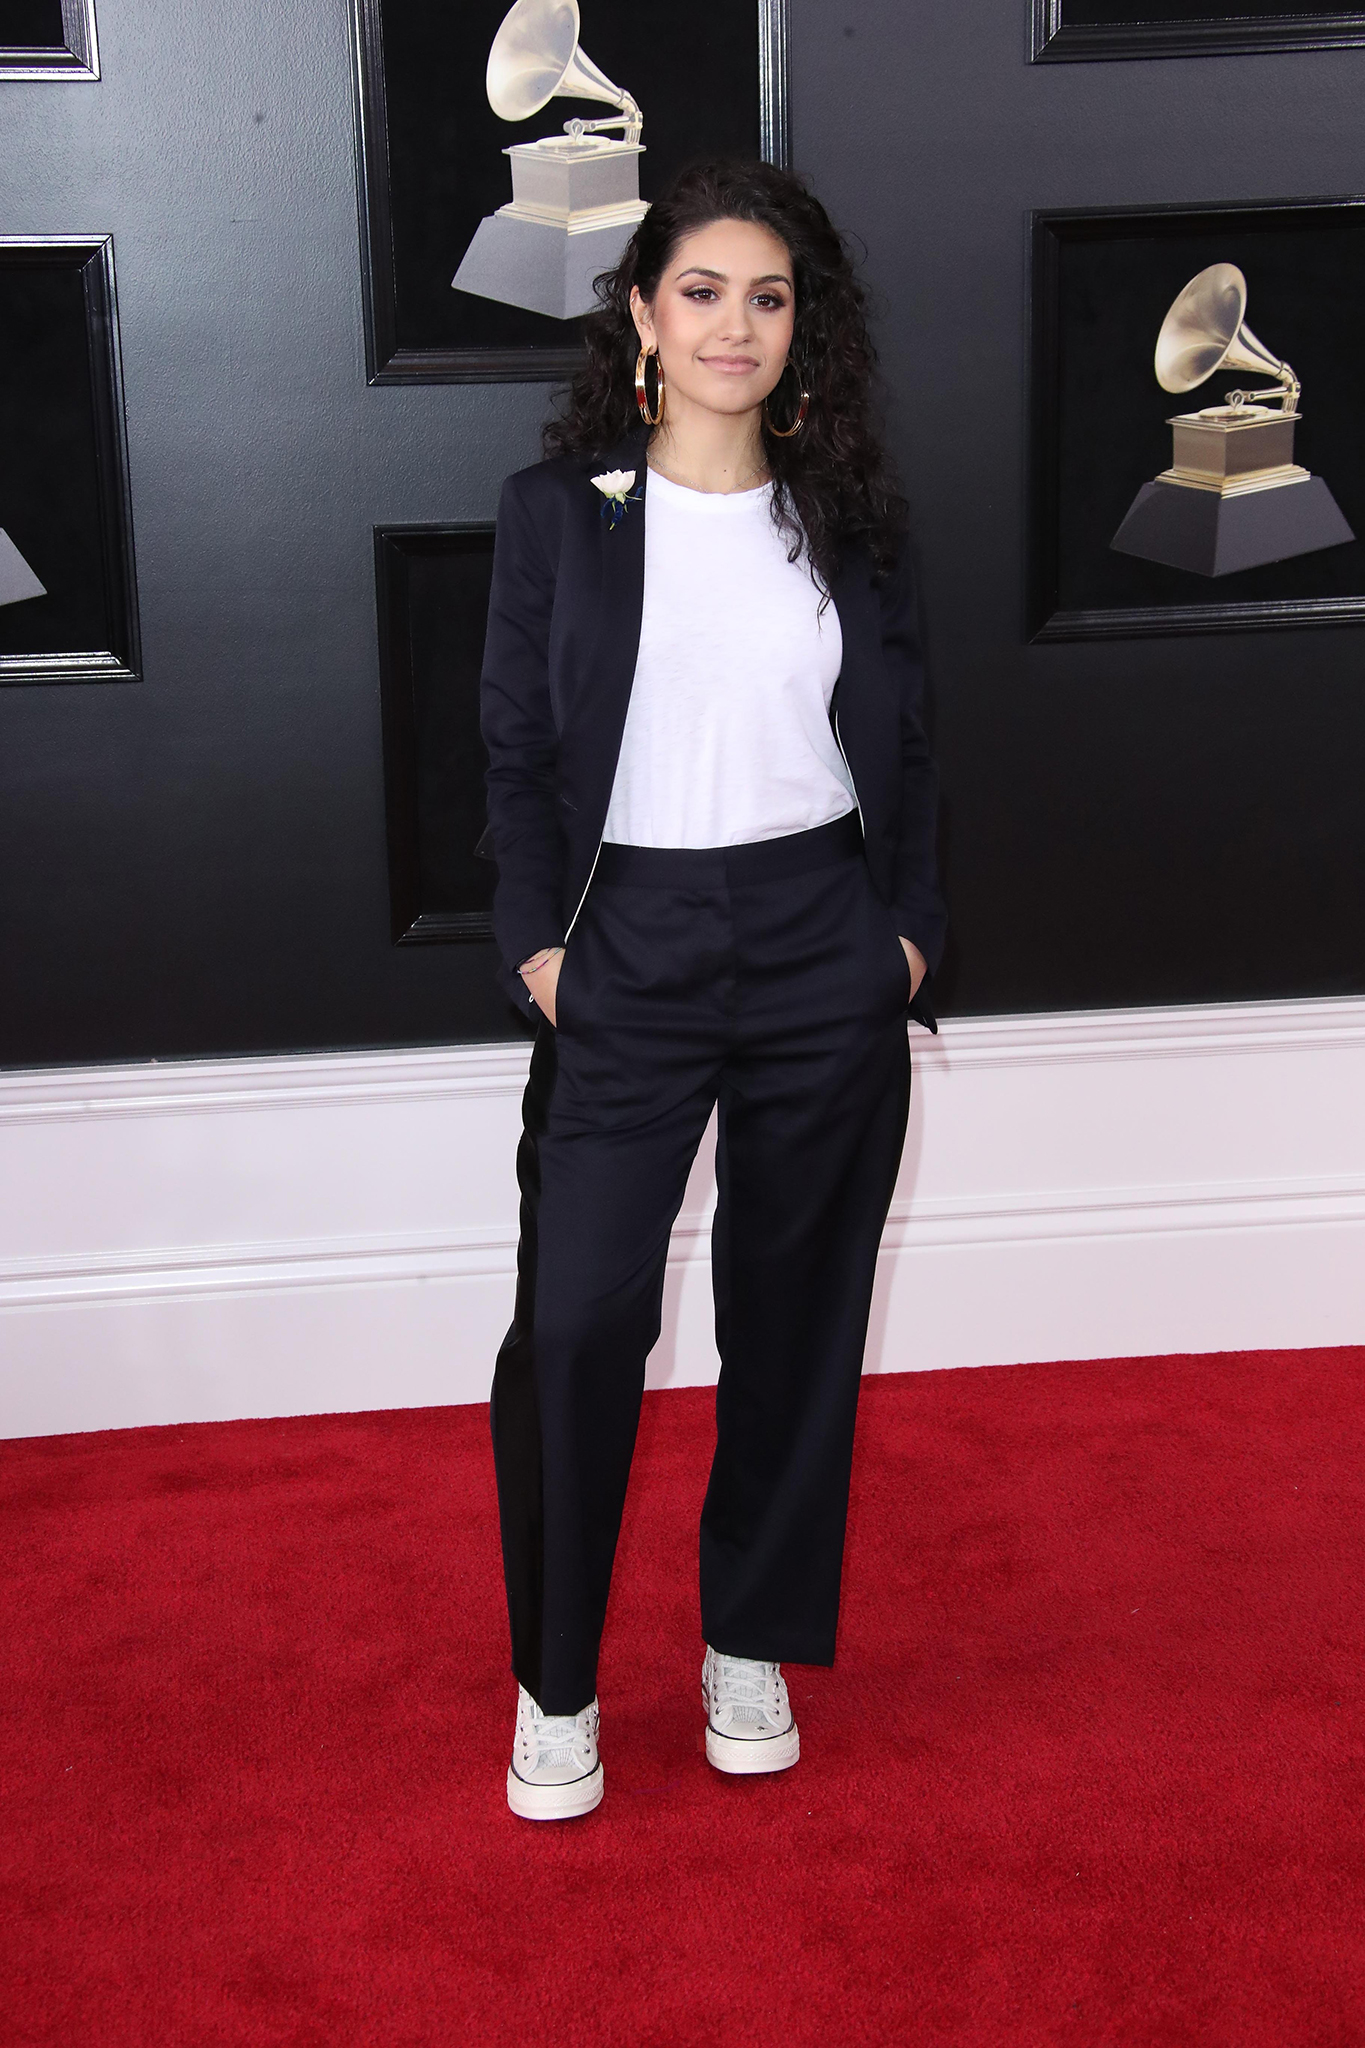 lessia Cara arrives at the 60th Annual Grammy Awards at Madison Square Garden.